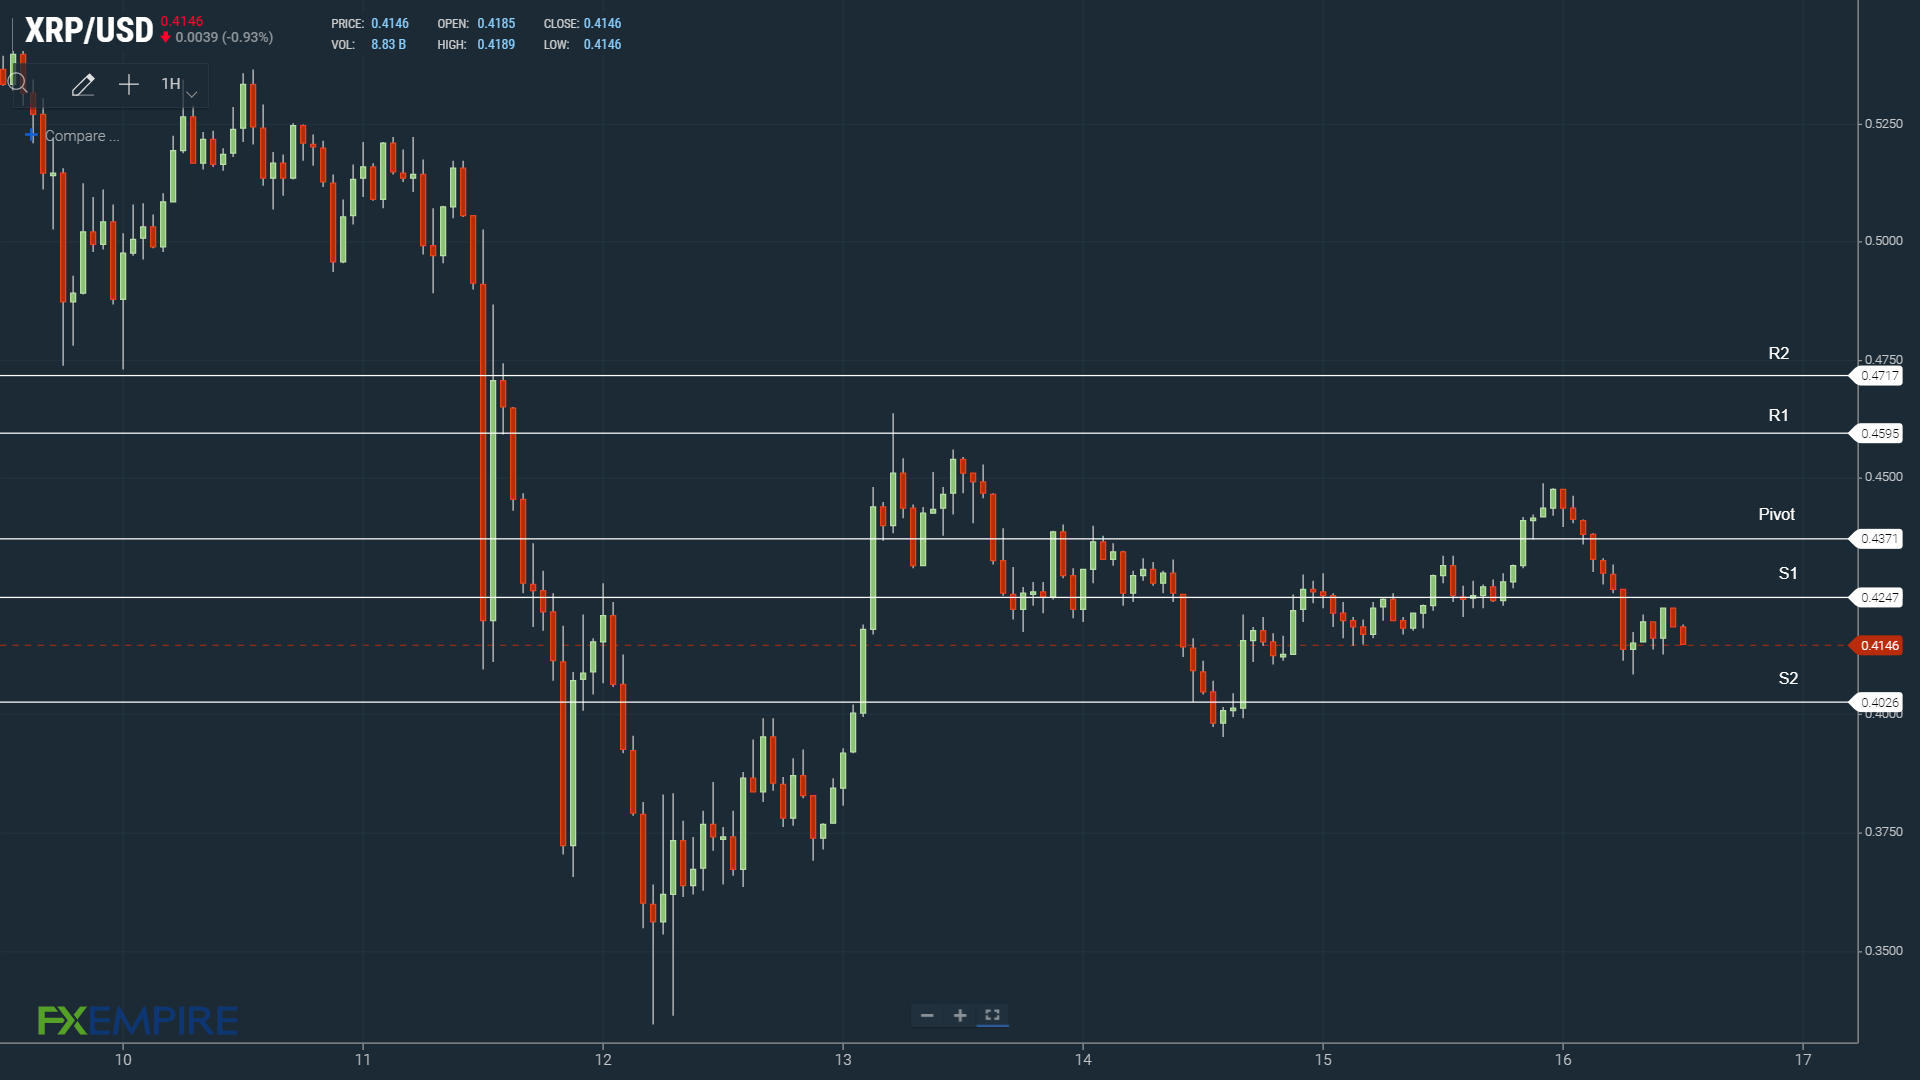 XRP tests support levels early.